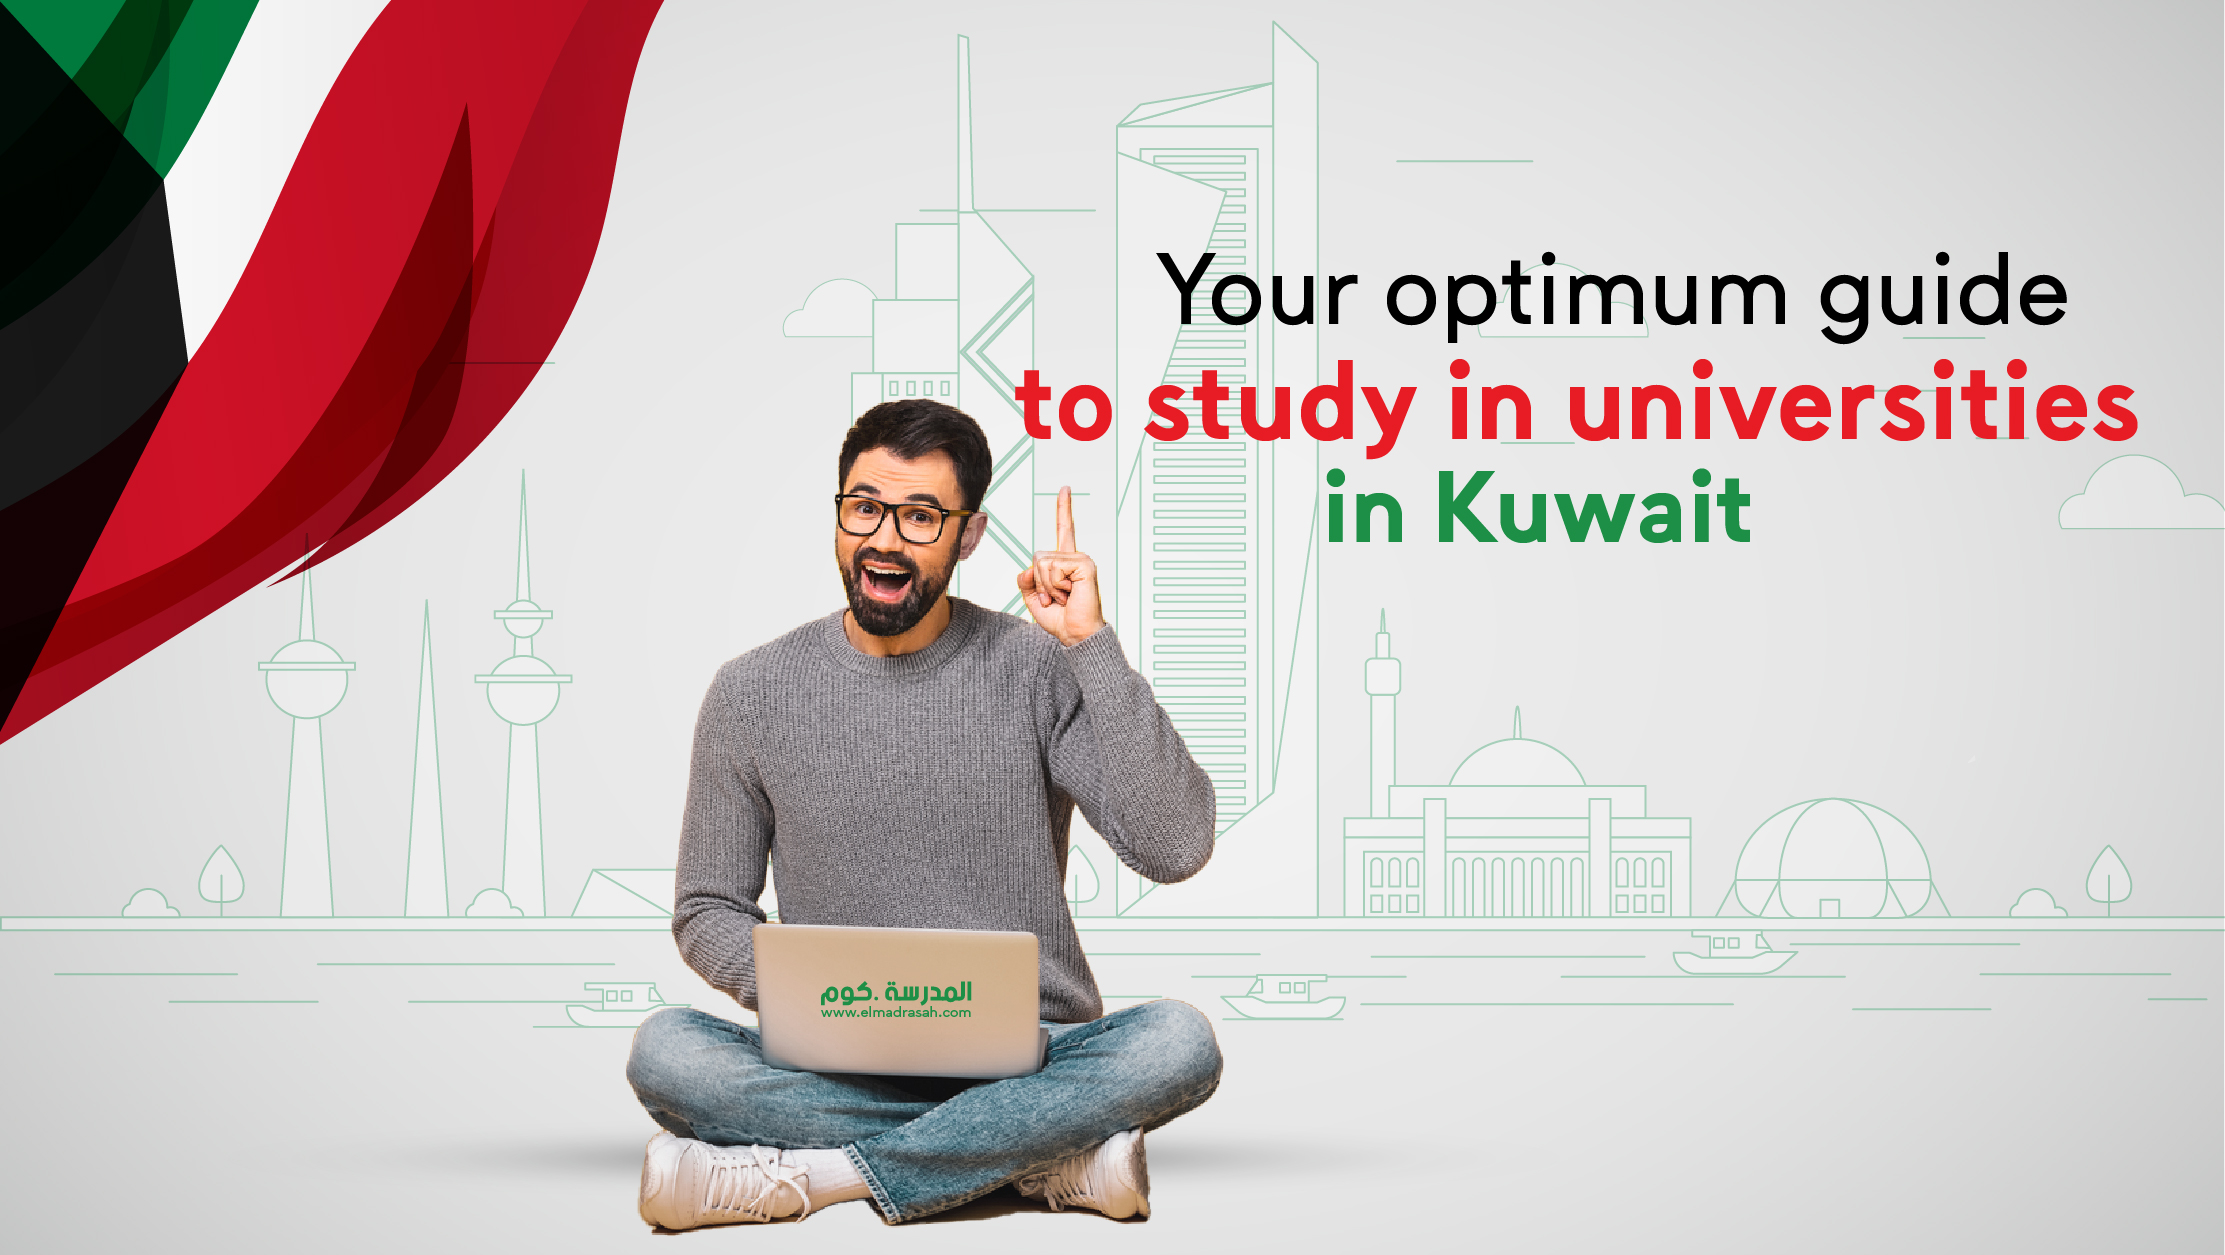 Your optimum guide to study in universities in Kuwait